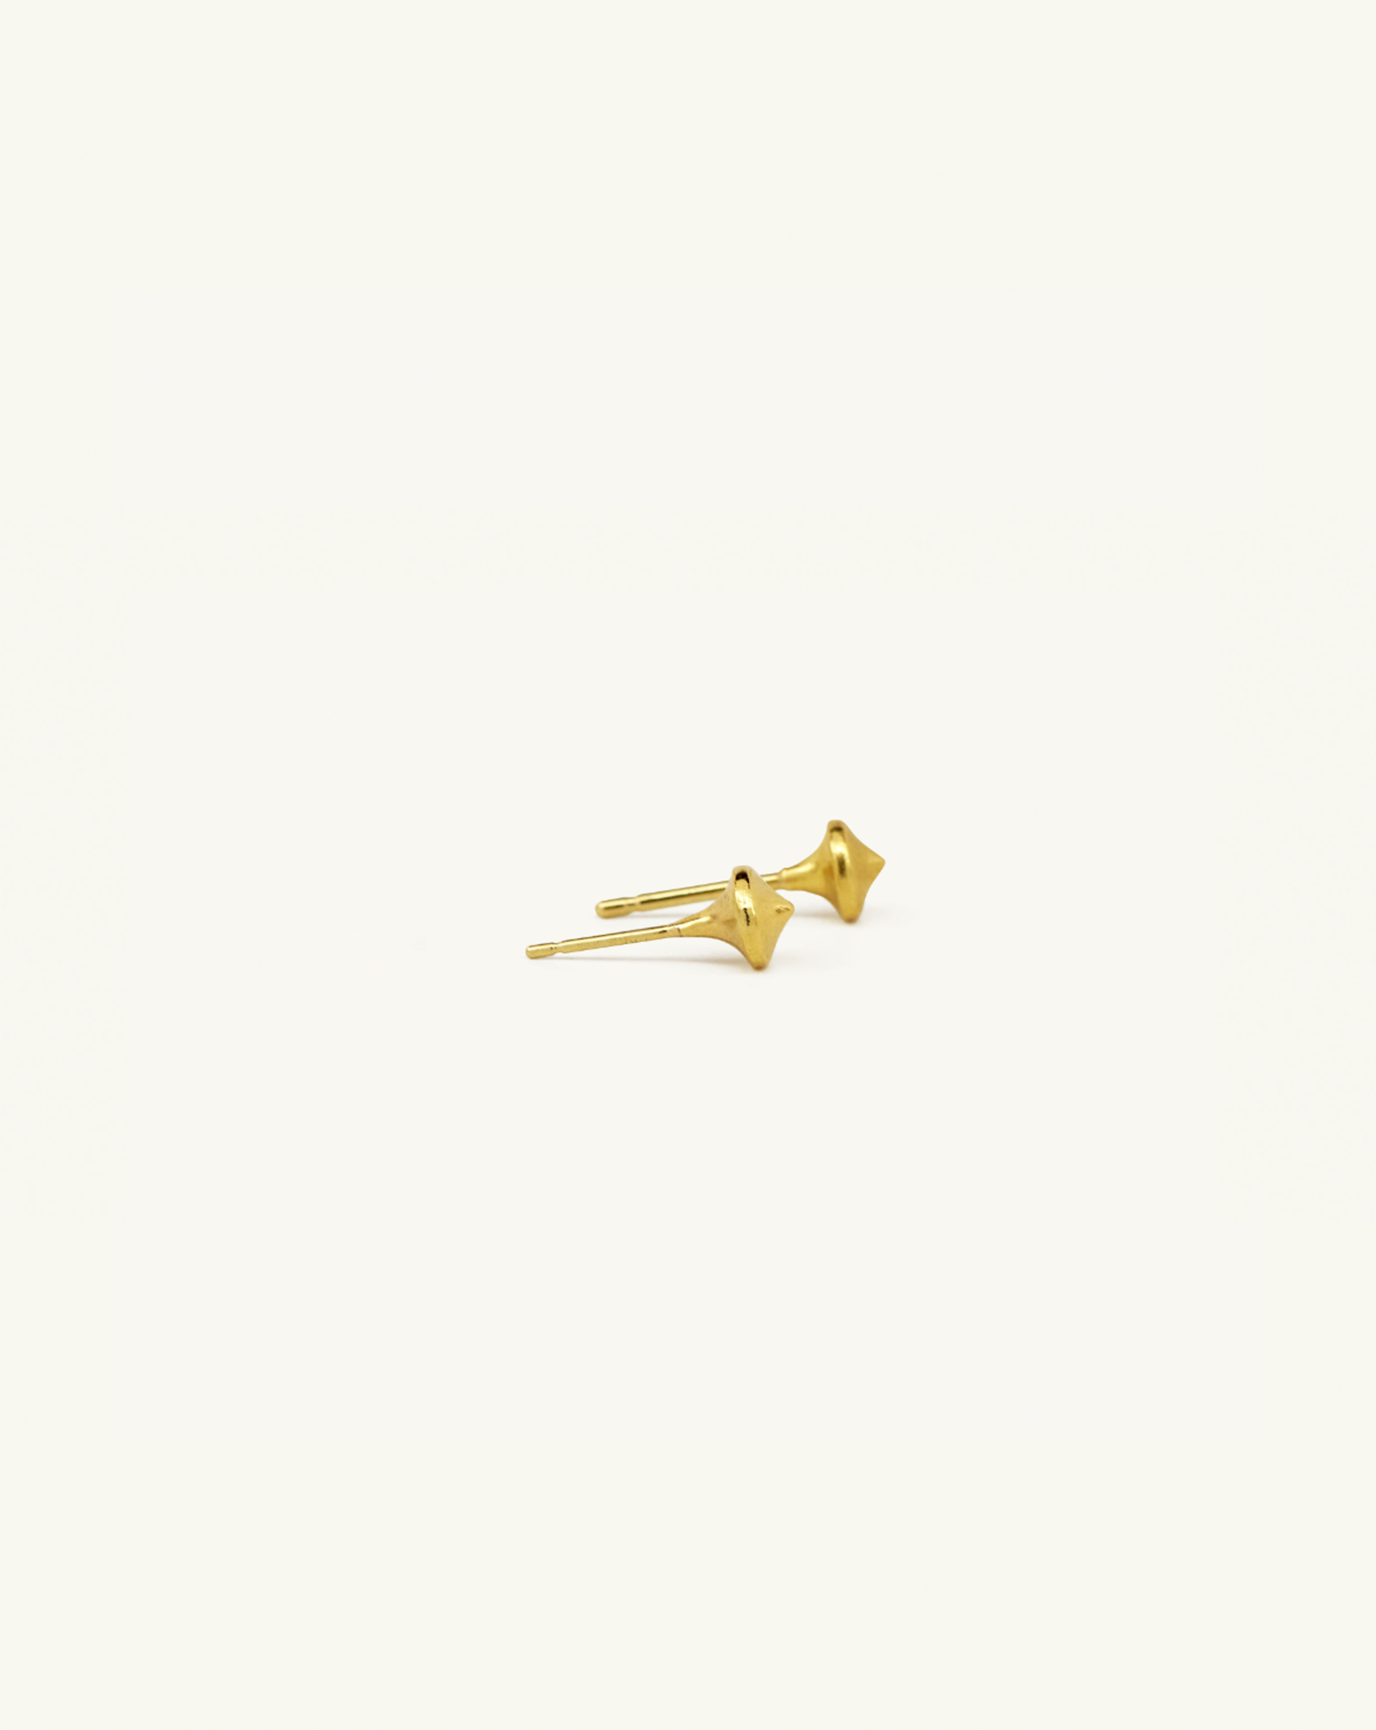 Product image side view of the i seira gold studs